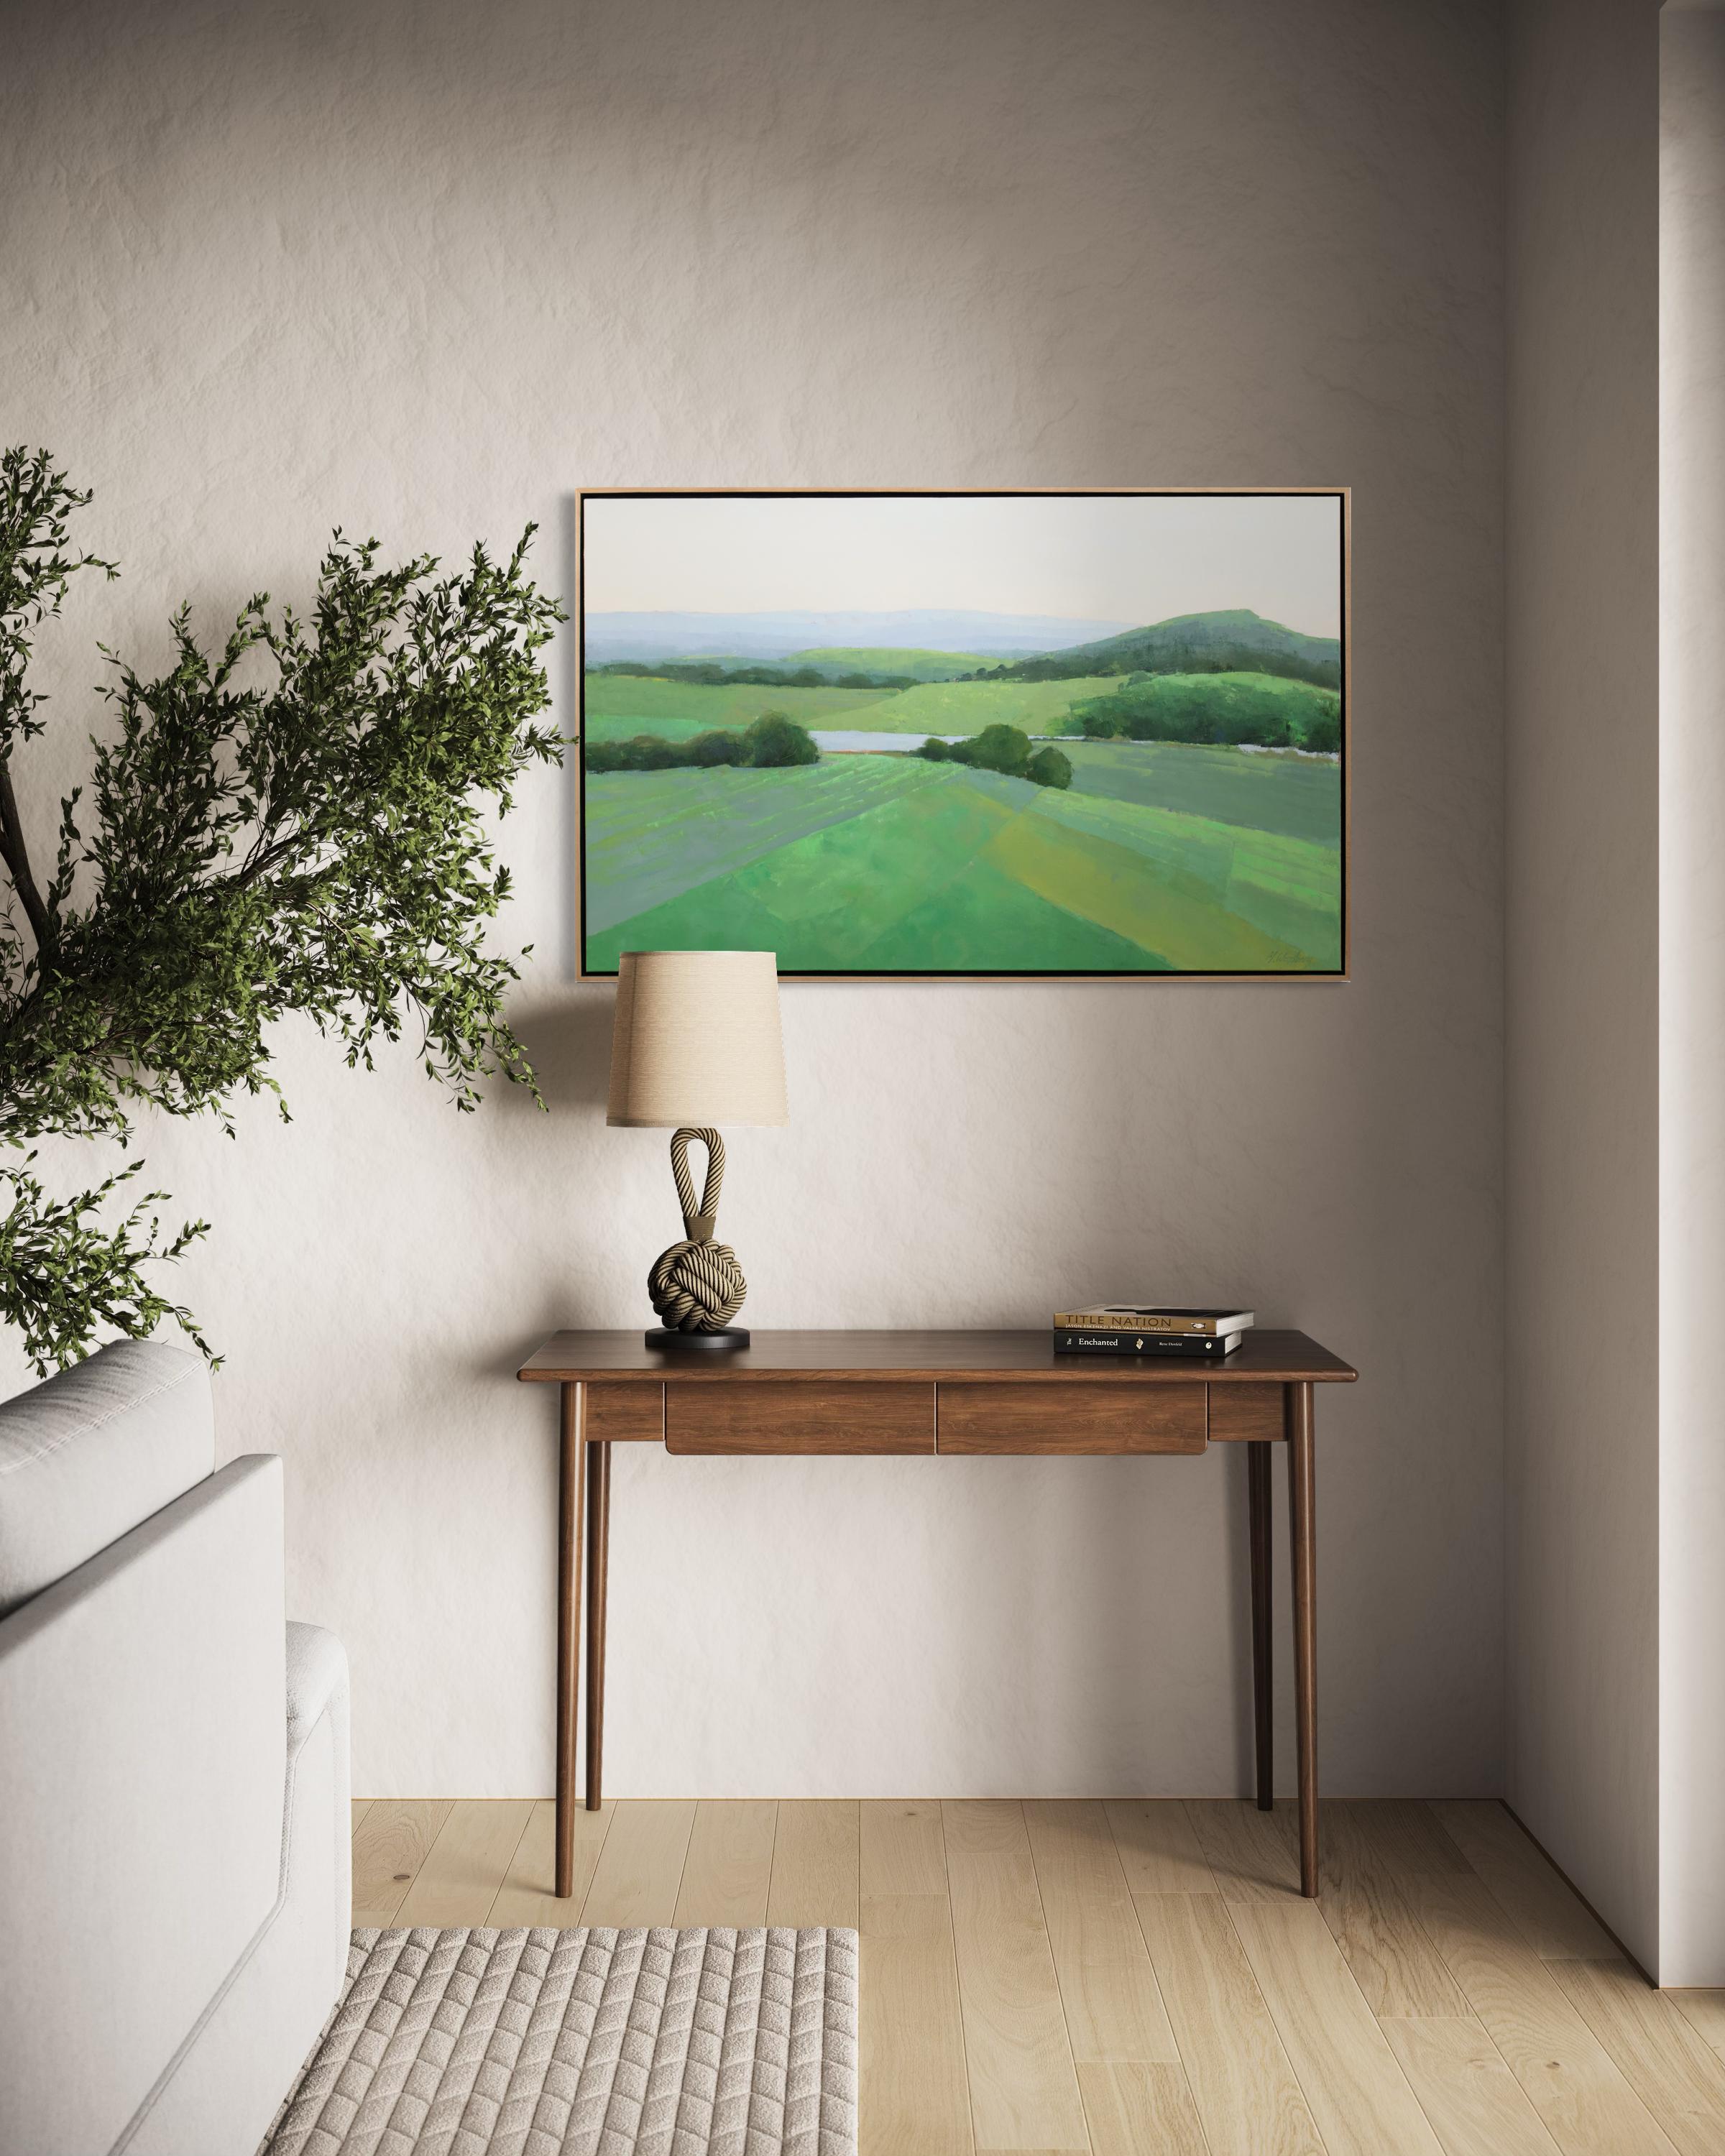 This traditional landscape painting by Molly Doe Wensberg features a cool palette, and captures a scene of lush green, rolling hills under a pale sky. It is very mildly abstracted, with the artist breaking down the scene into planes of varying